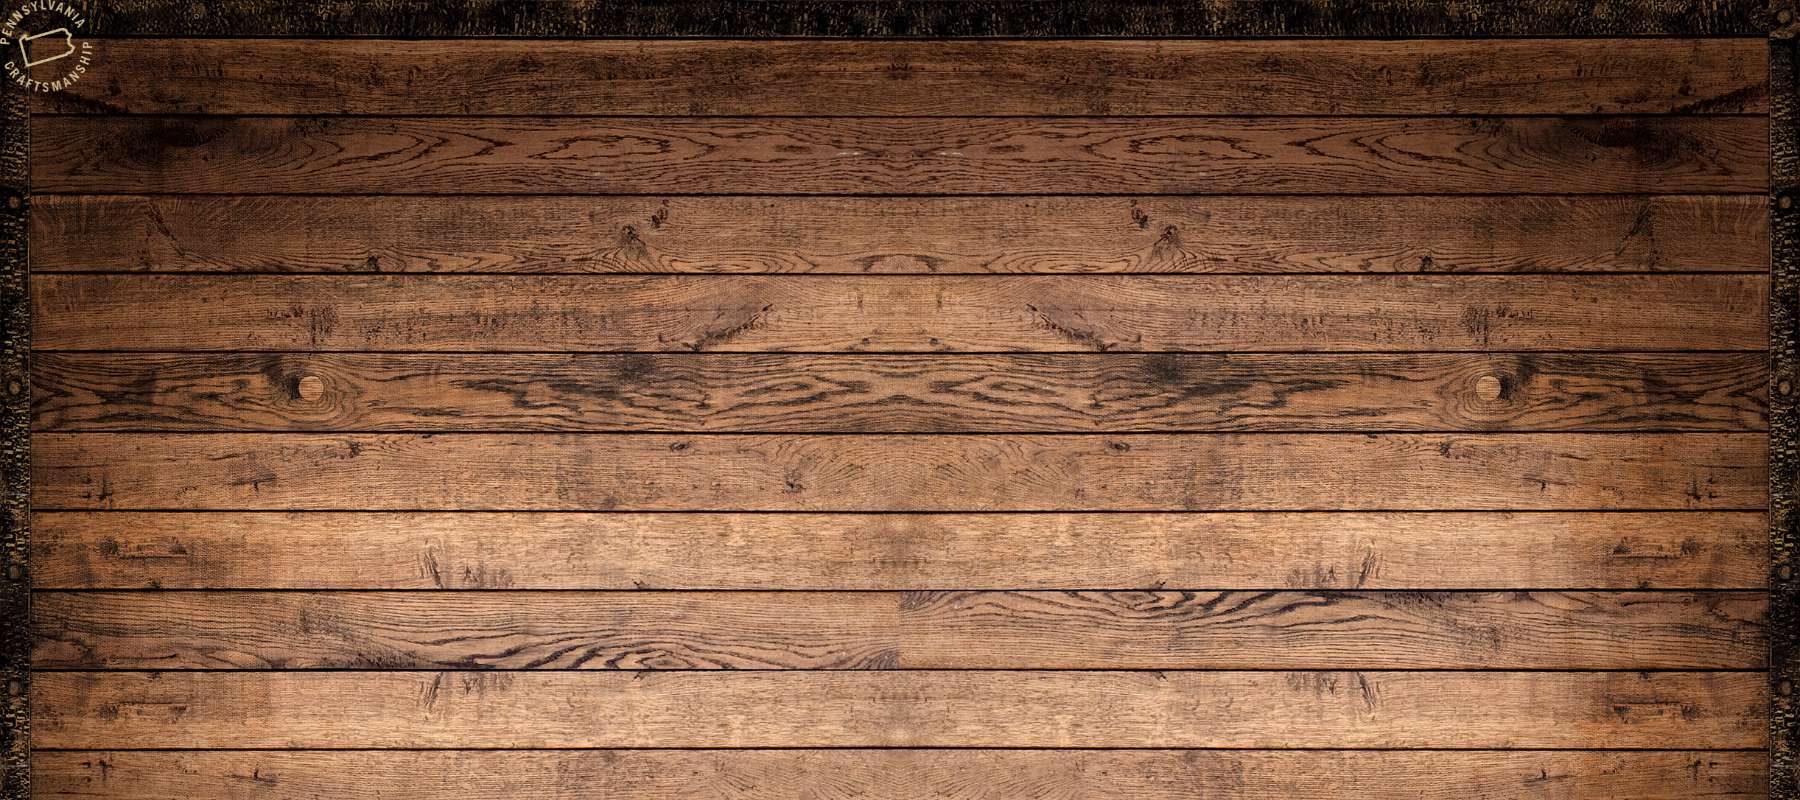 What are Amish OCS wood stains? - snyders.furniture